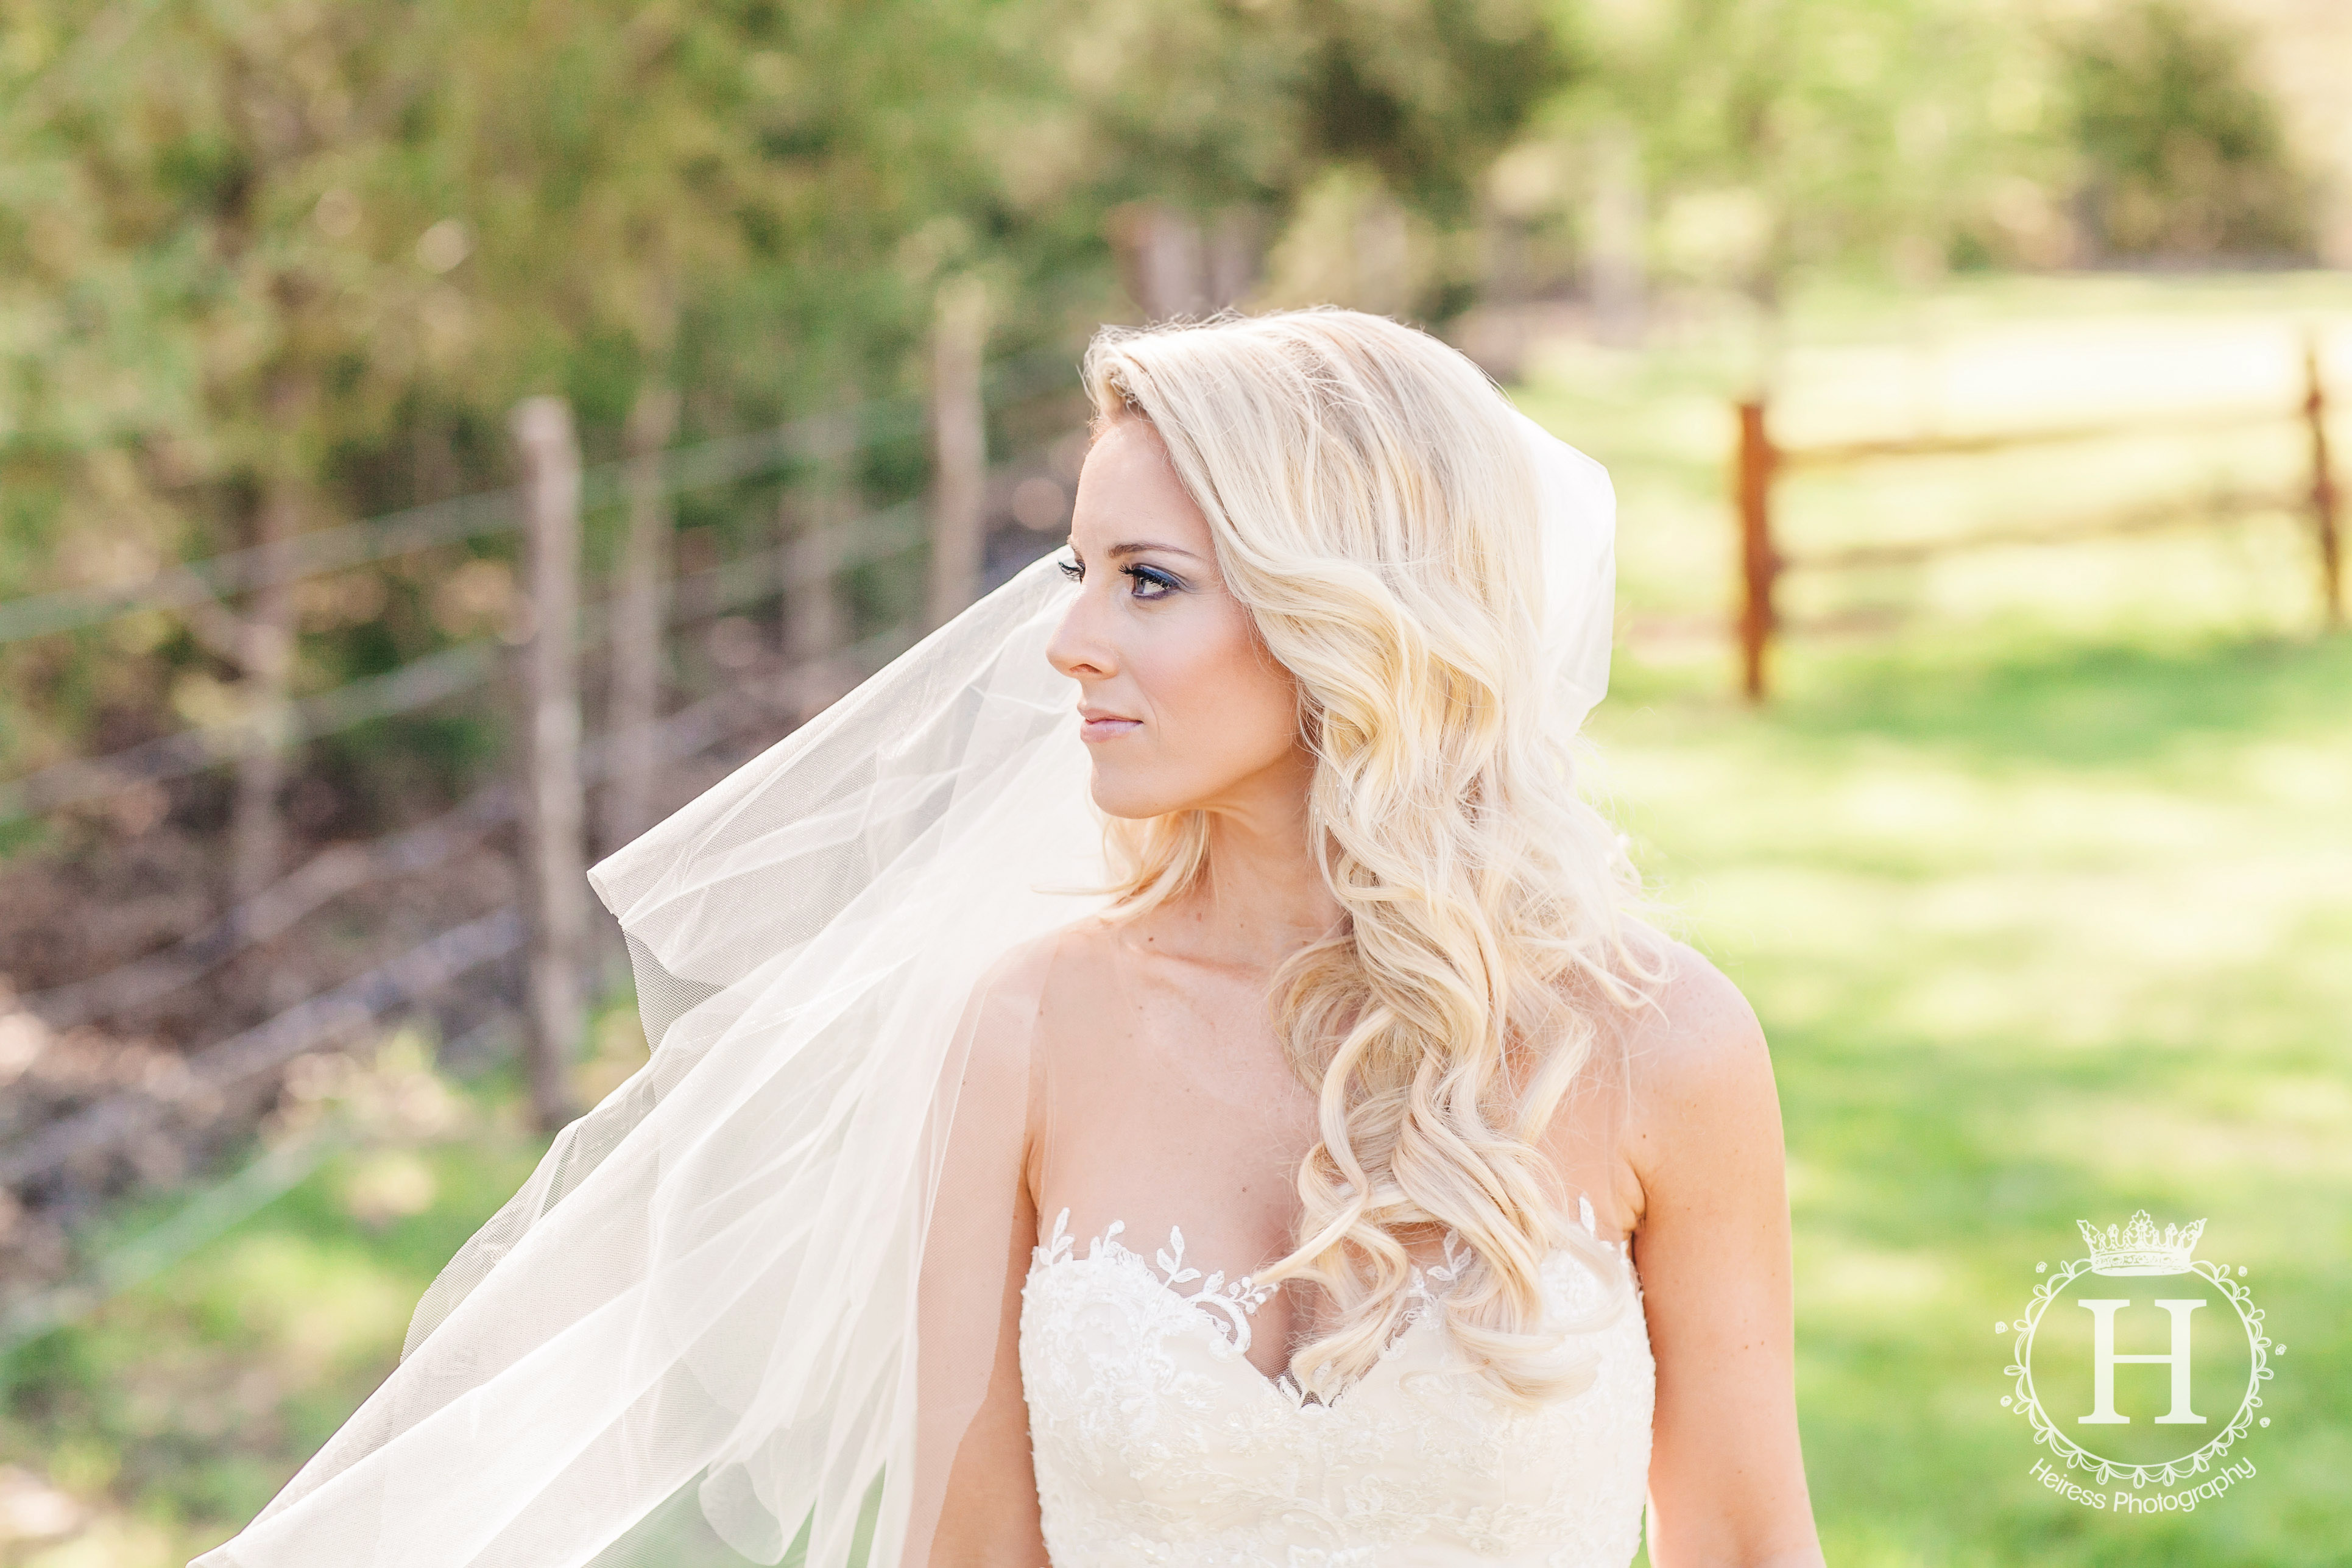 Wedding Photographers in Fort Worth TX